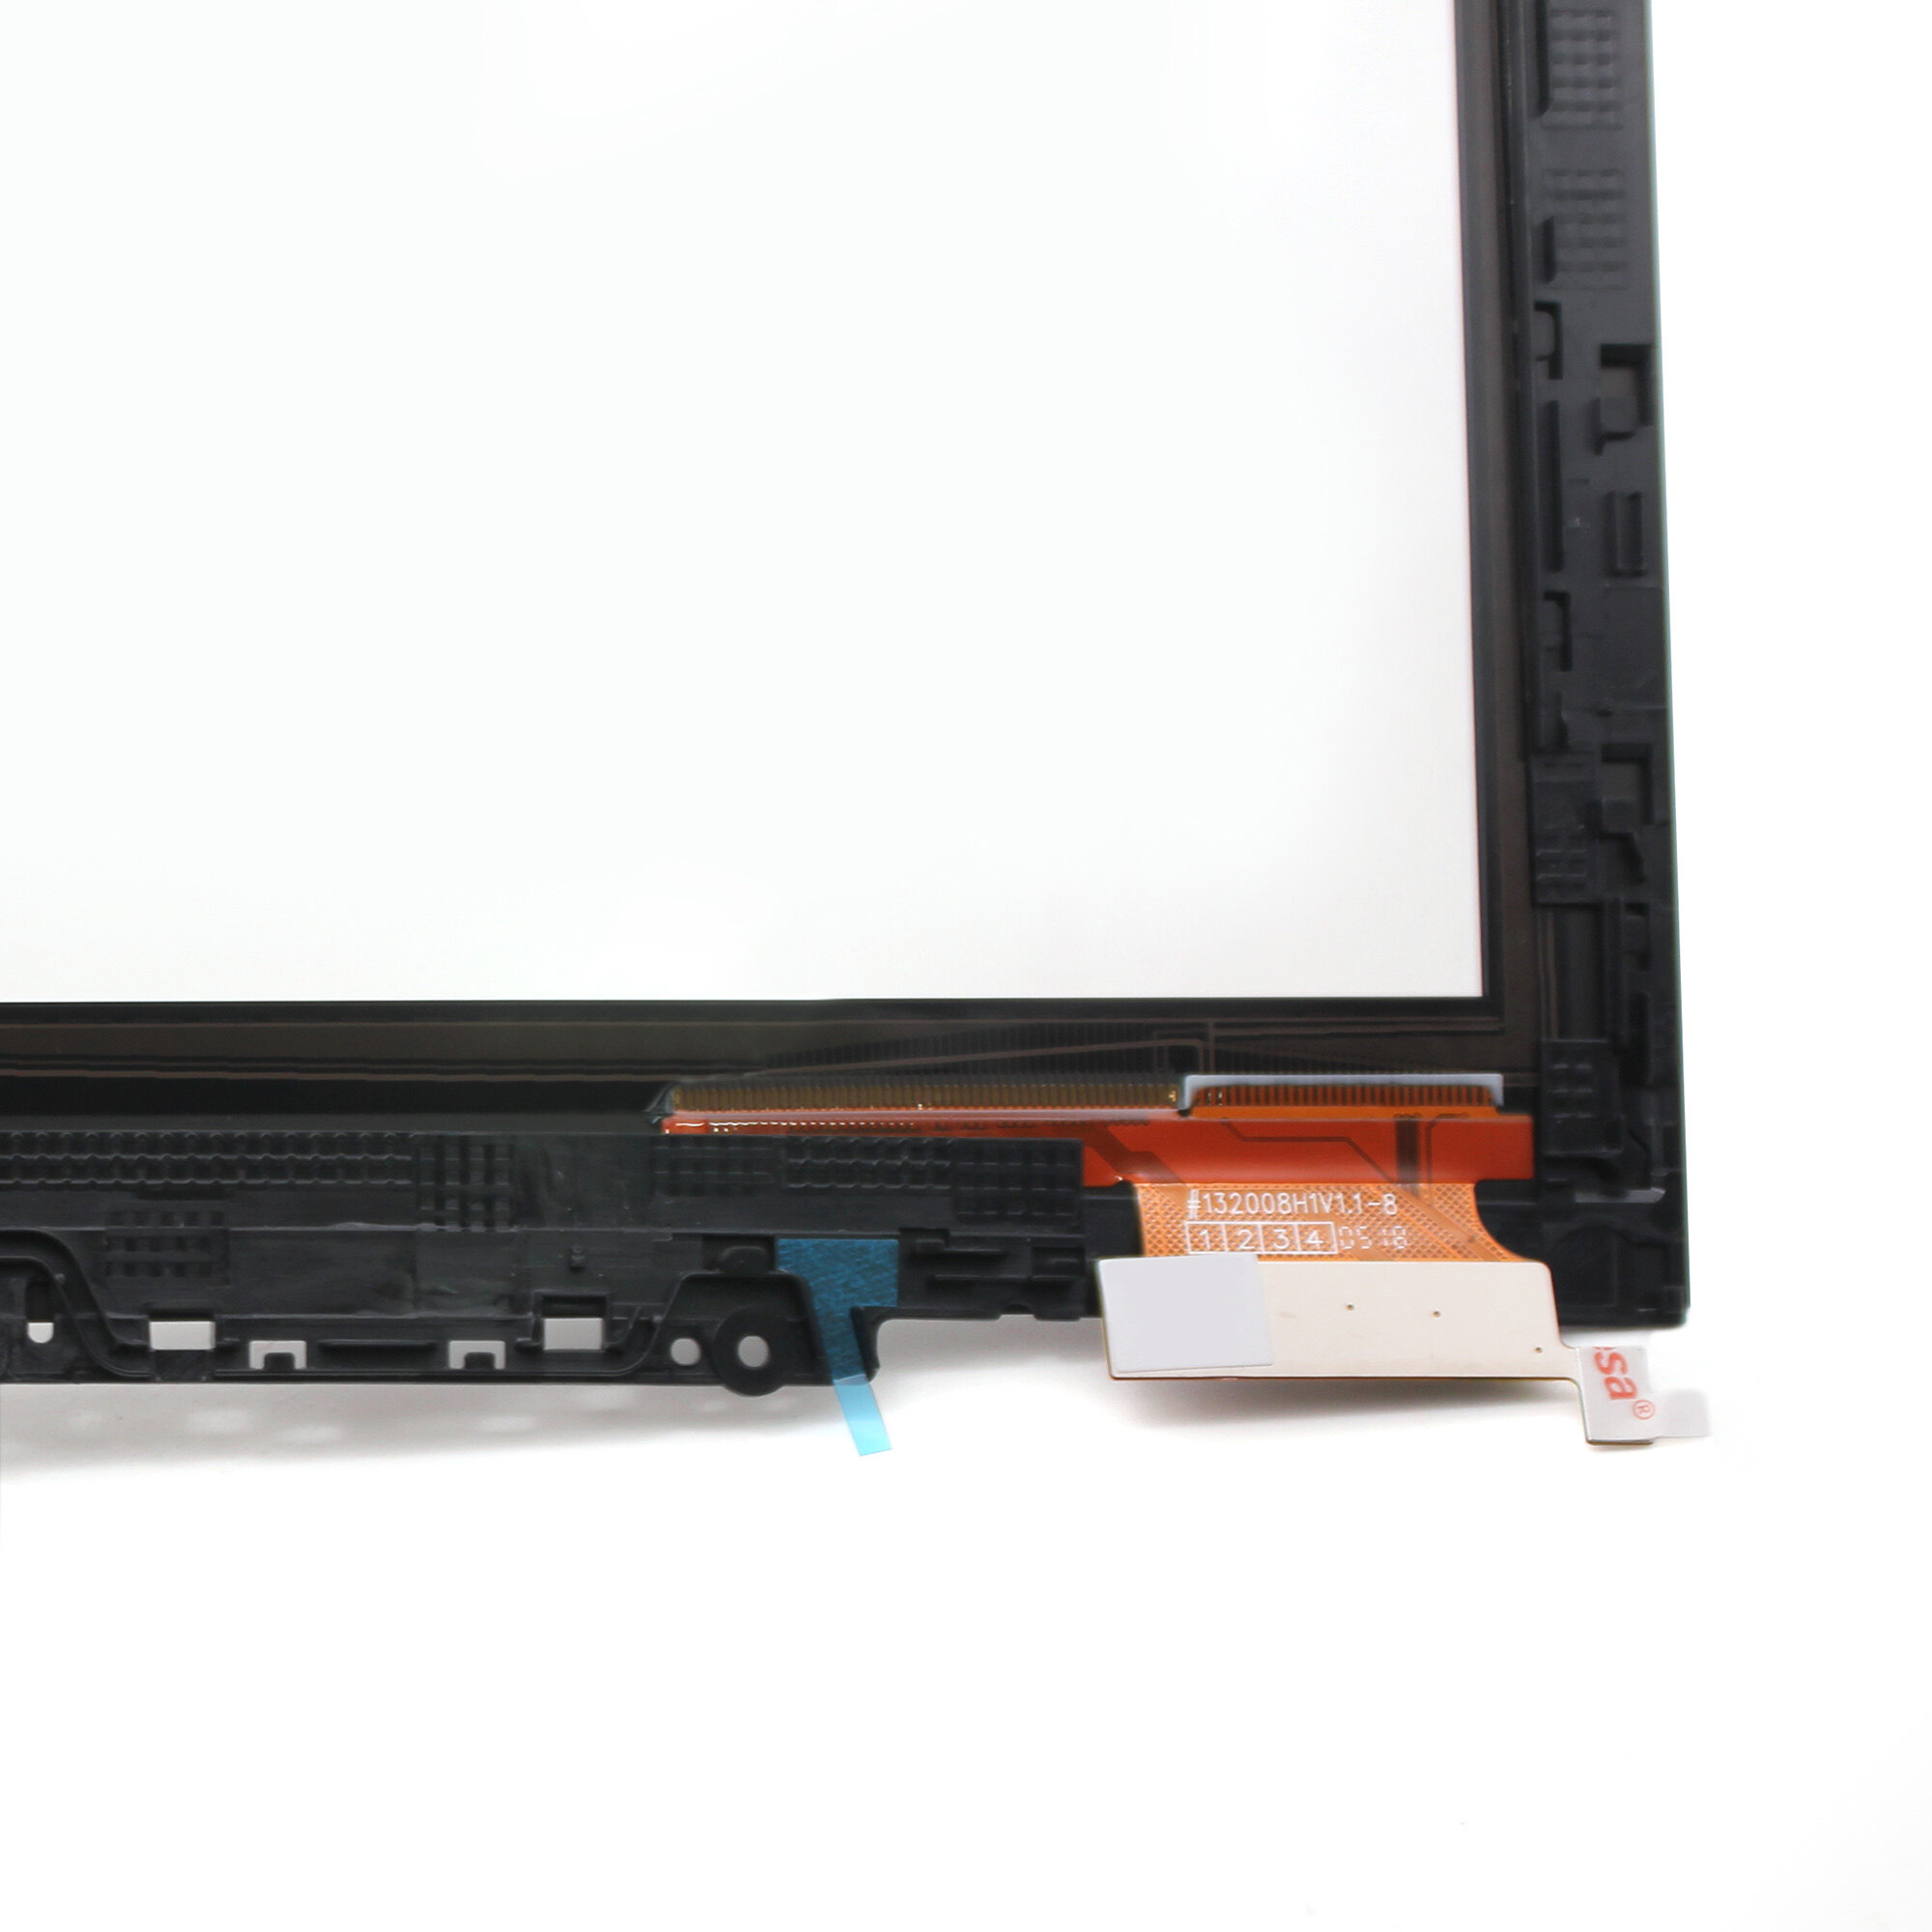 11.6" HD LCD Touch Screen Digitizer Assembly With Bezel Fro Lenovo Yoga 310-11IAP 80U2 5D10M36226 30pin